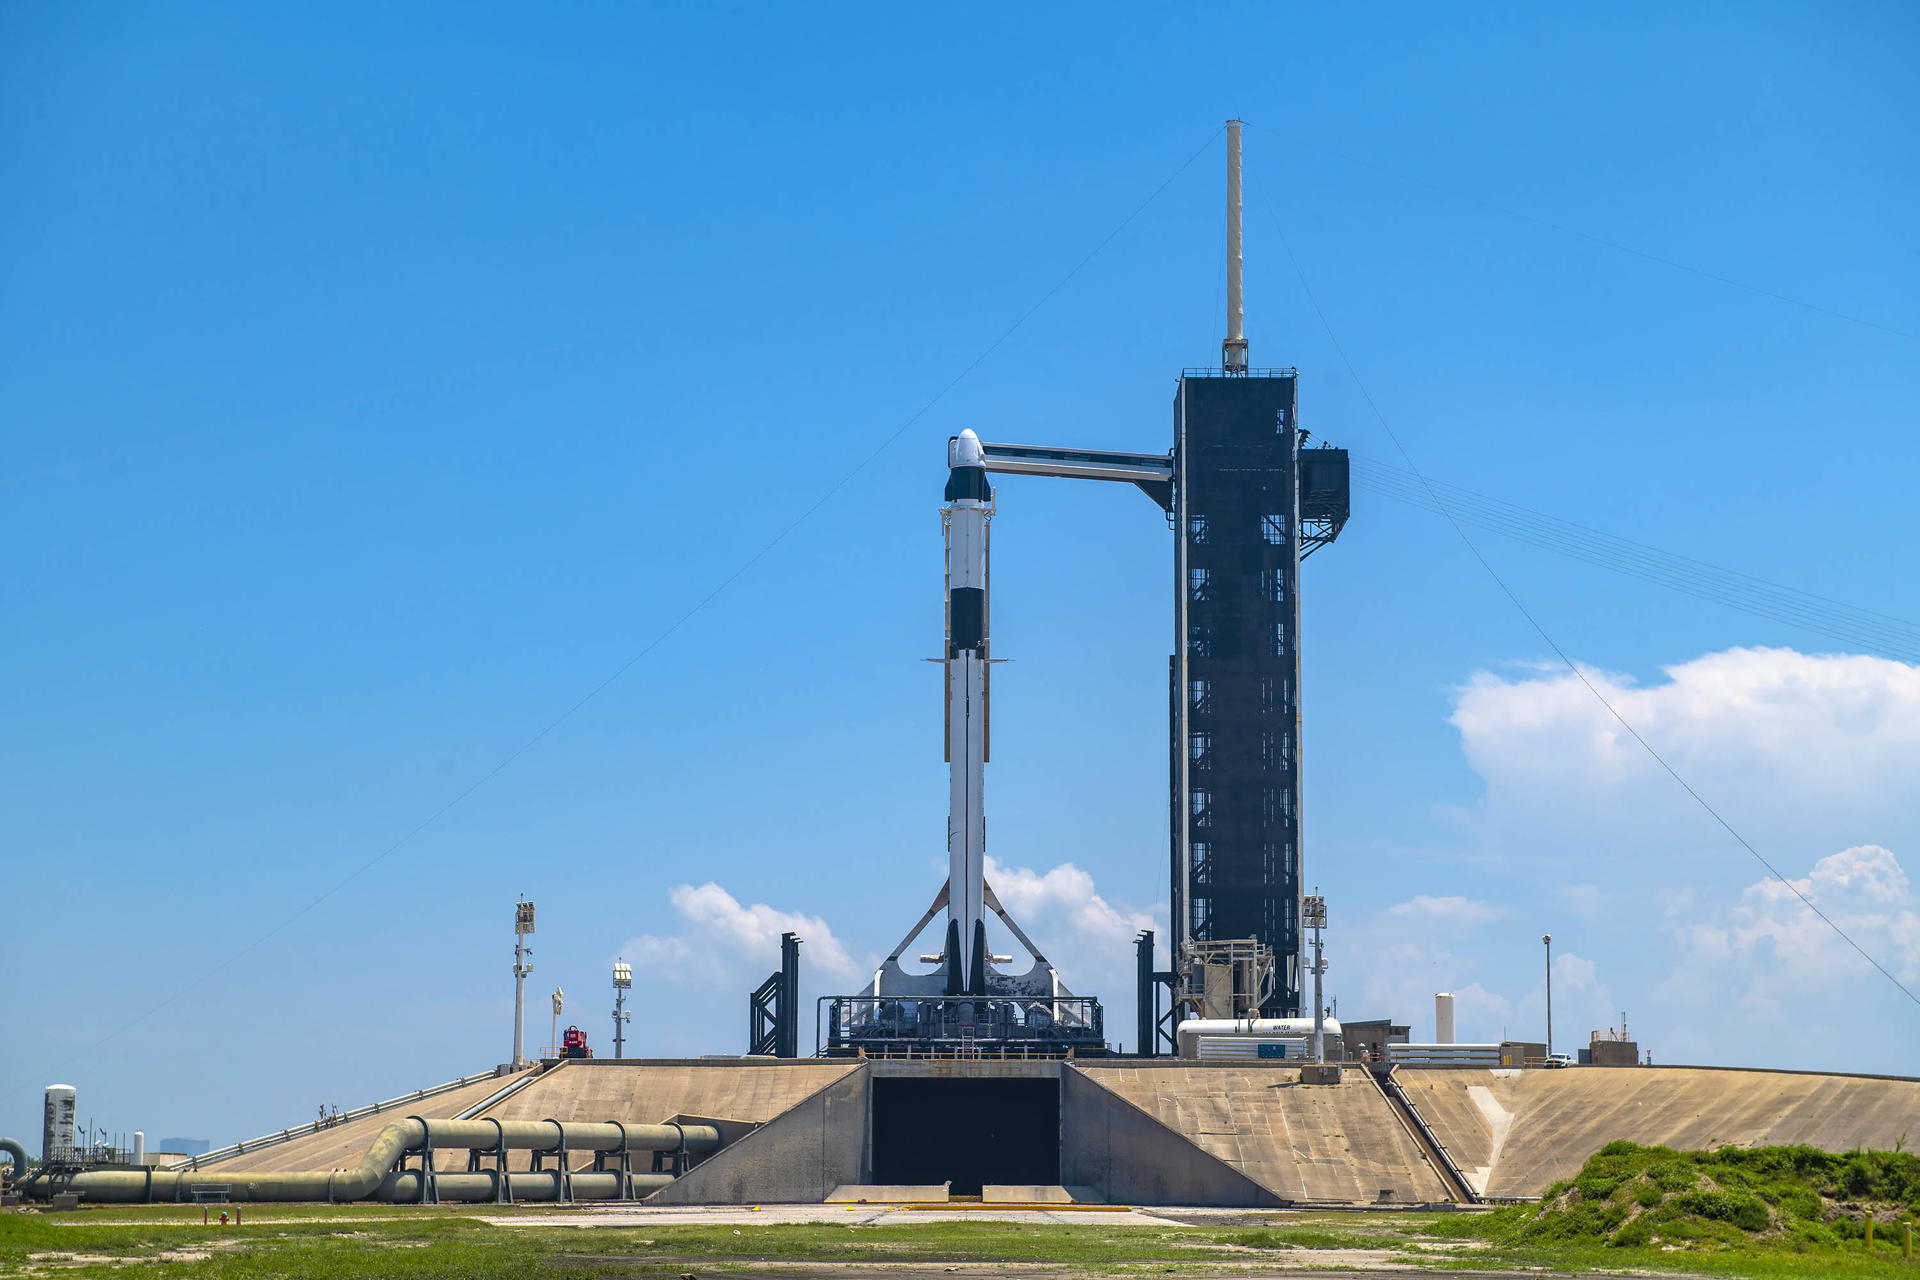 File photo provided by Axiom Space showing the SpaceX Dragon Freedom capsule sitting atop a Falcon 9 rocket on a launch pad. EFE/Axiom Space